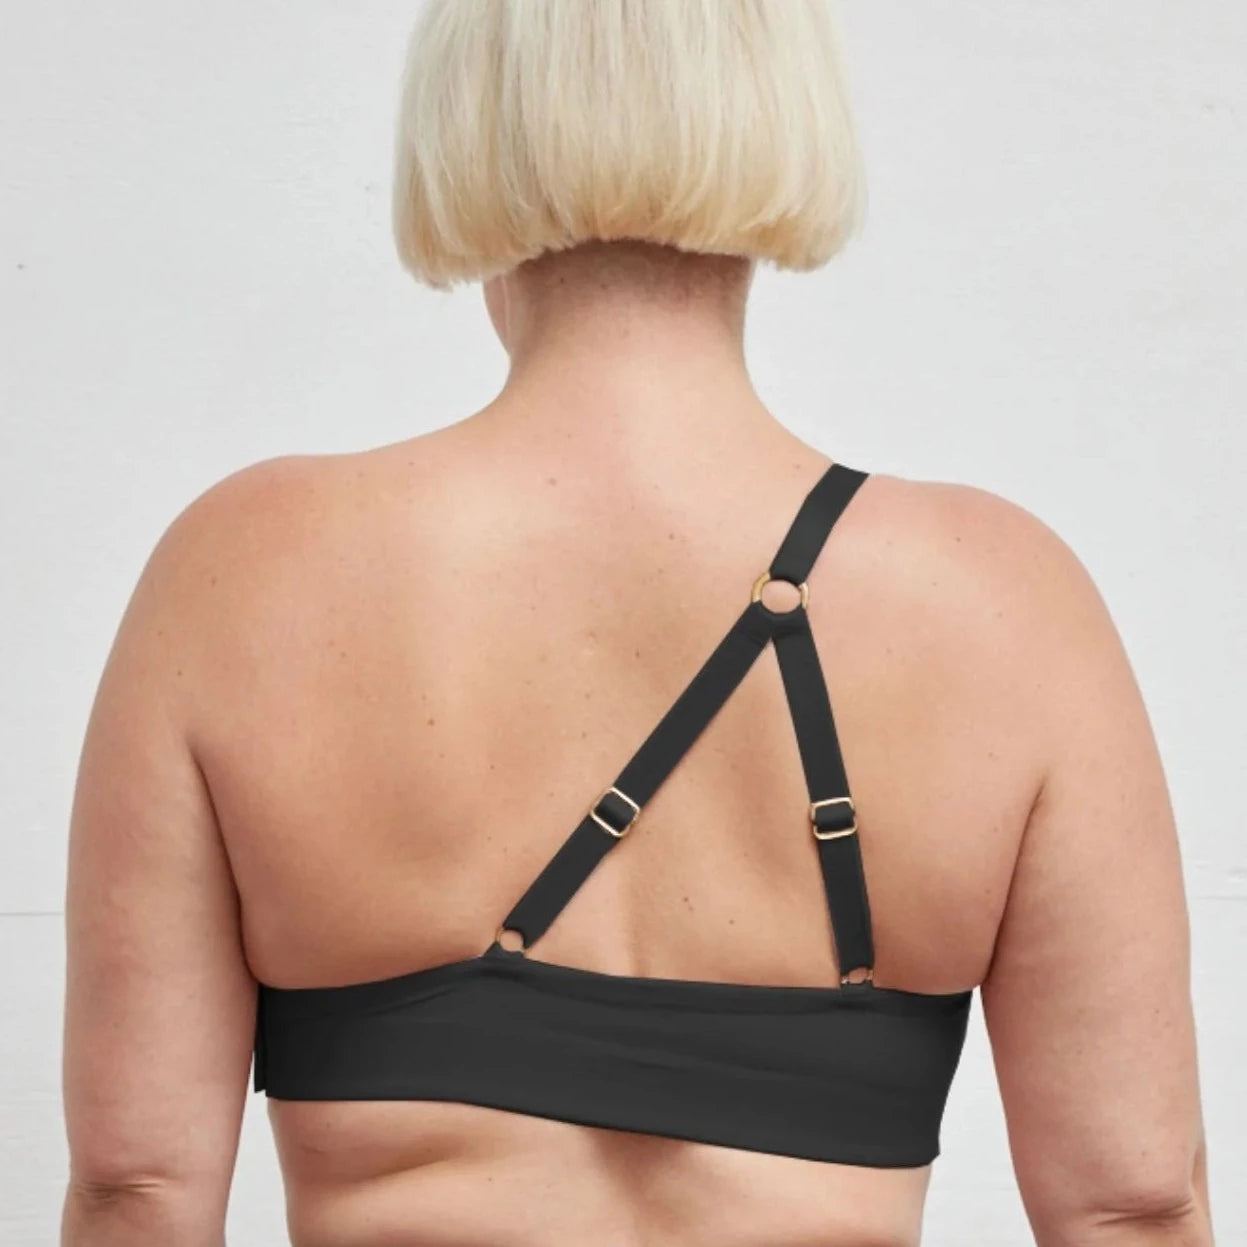 Rachel Right Unilateral Molded Cup Sling Bra in Black | A molded cup bra with a side closure and intricate strap design on the back, providing stability and contours your curves for a snug and secure fit | By AnaOno